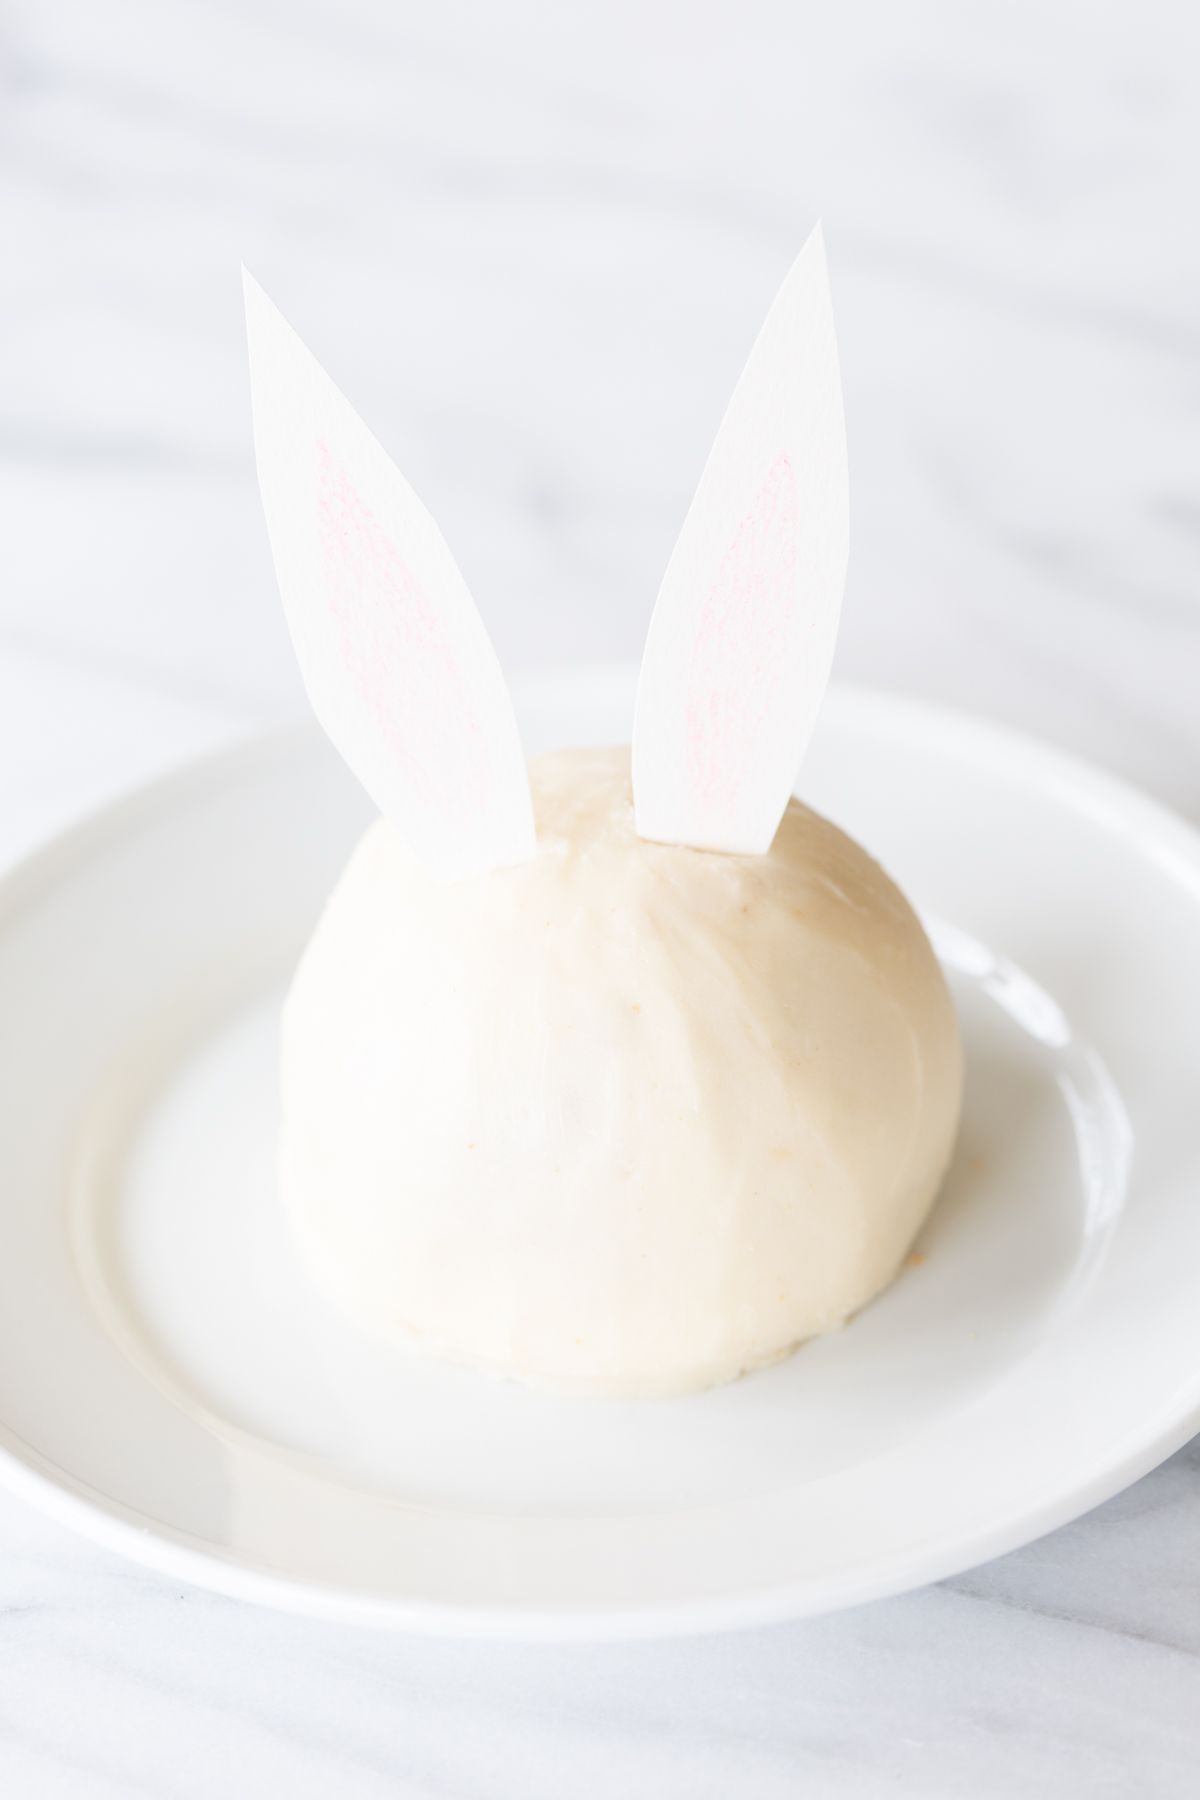 A white plate with an Easter Bunny cheese ball with paper ears.